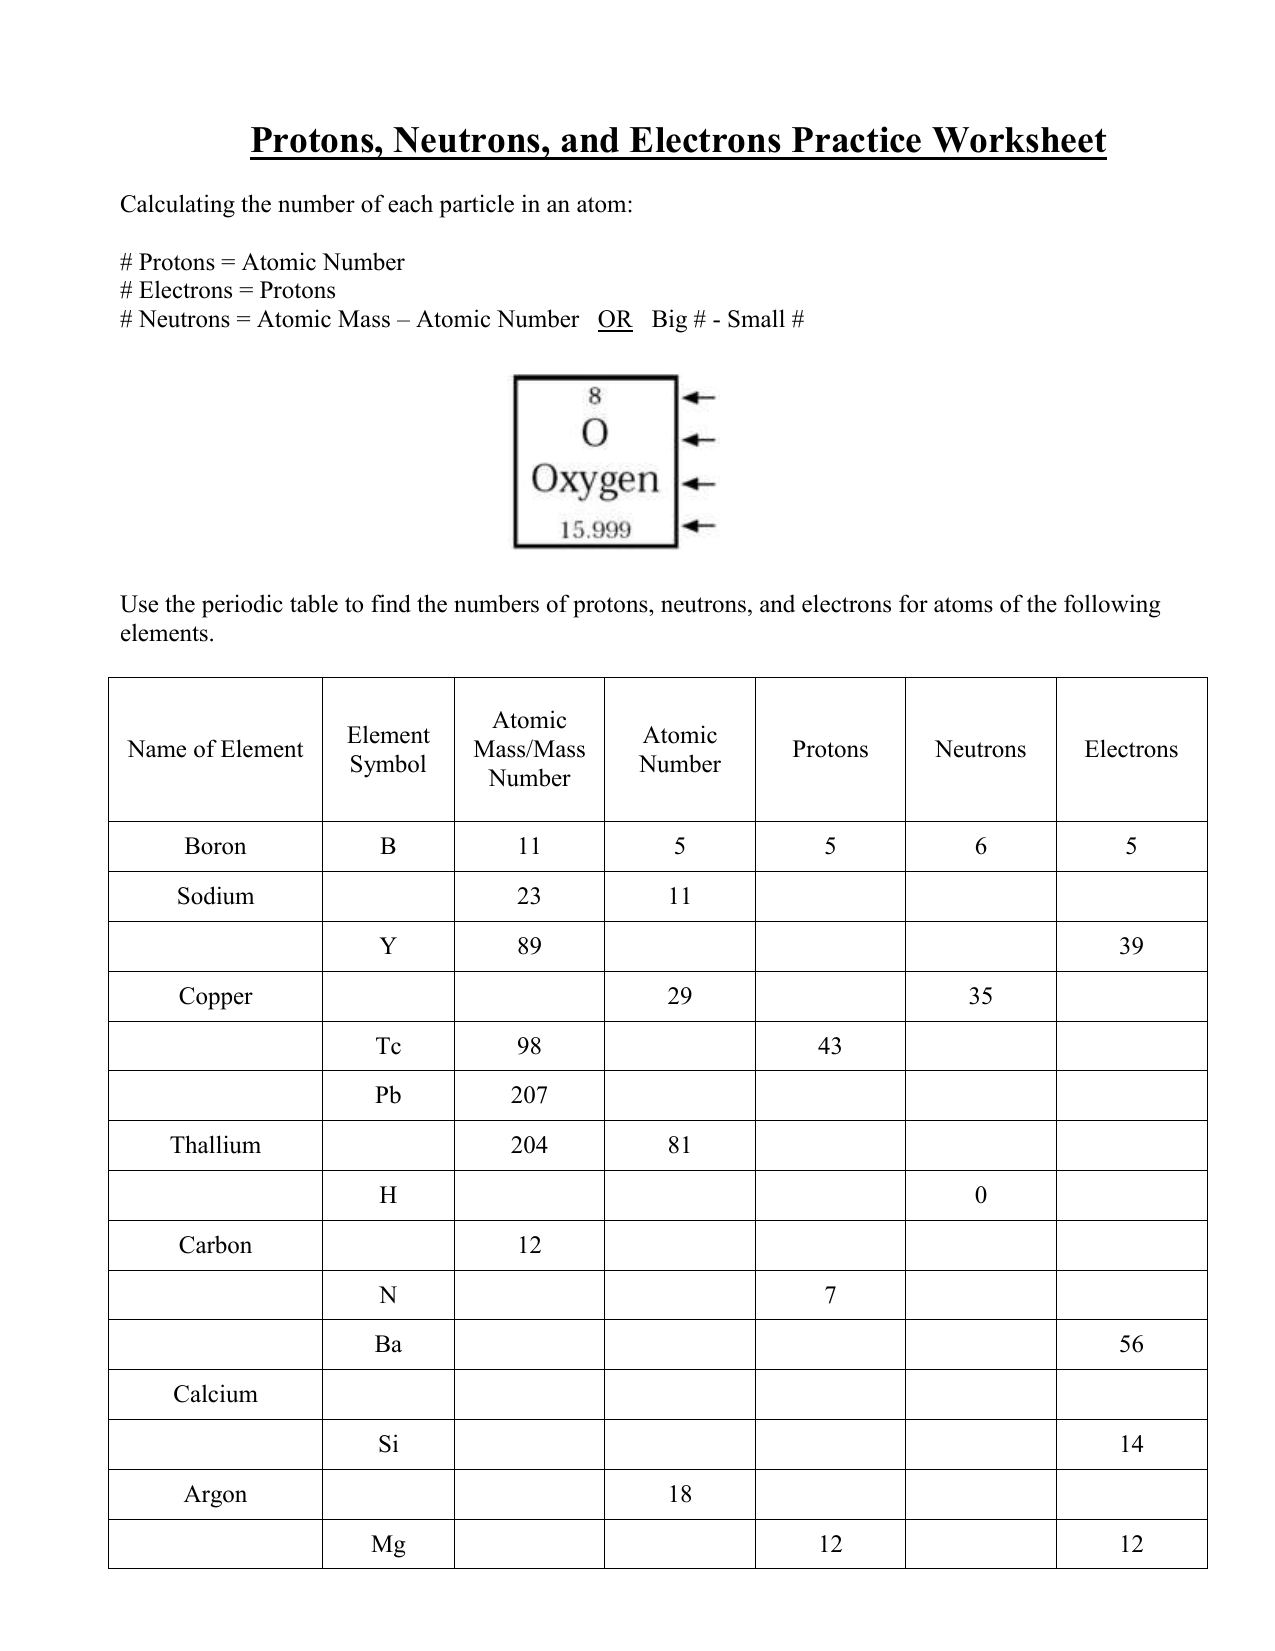 How To Calculate Protons Neutrons And Electrons Worksheet Answers